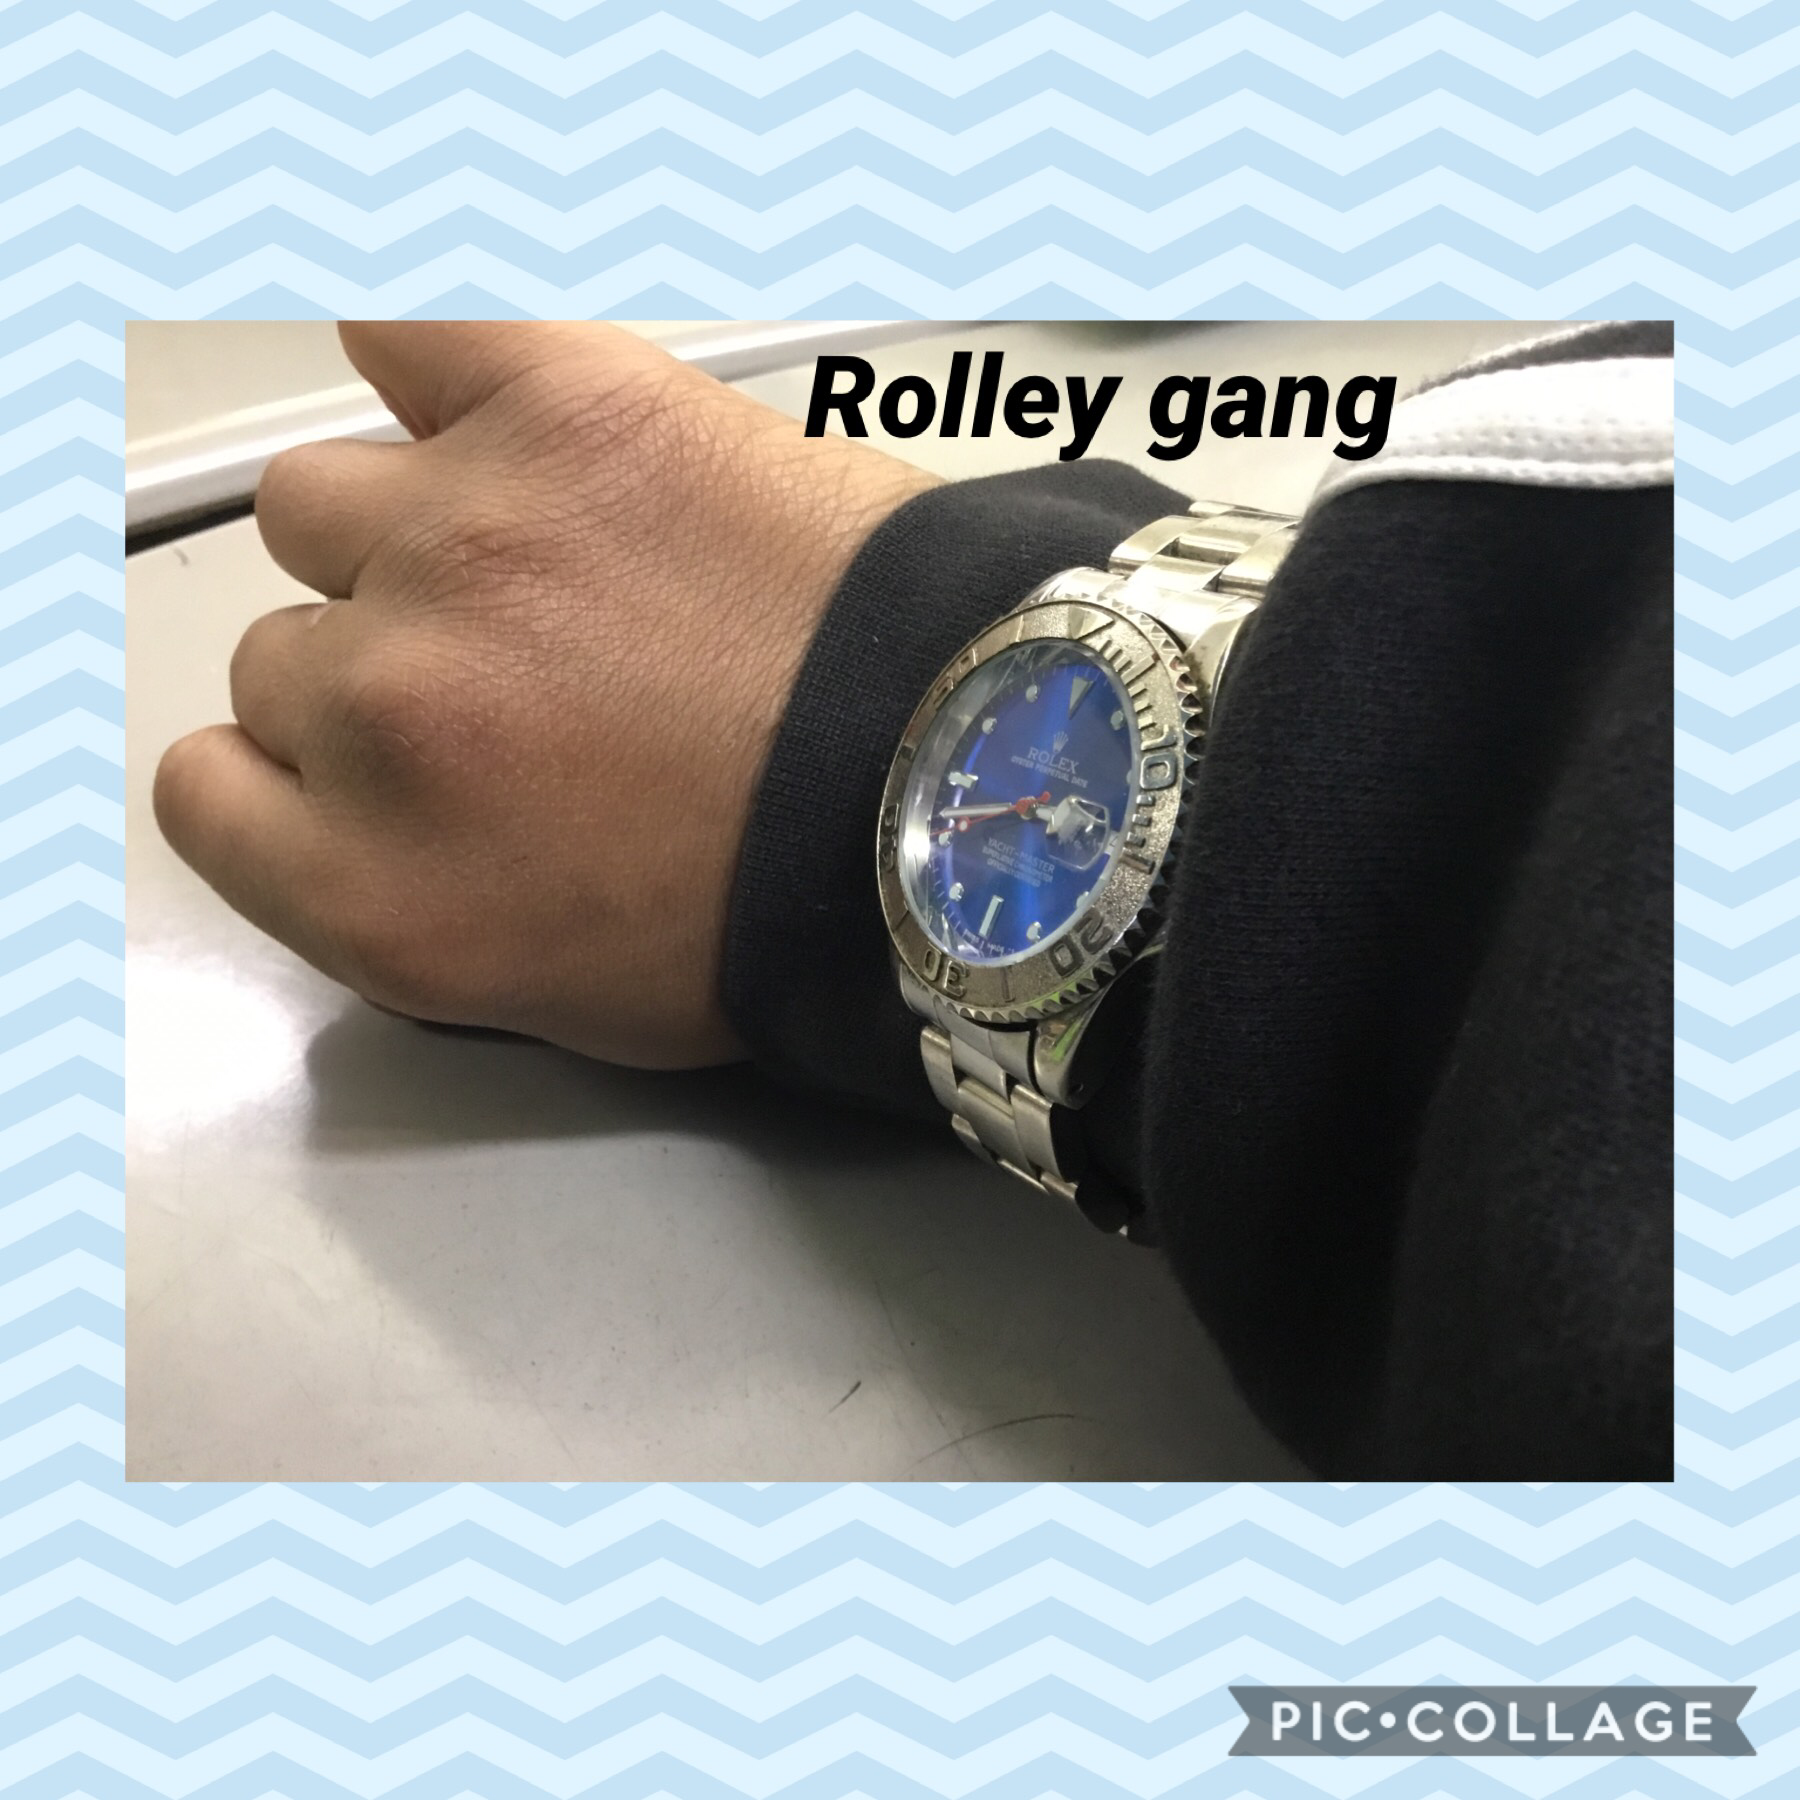 Rolley gang